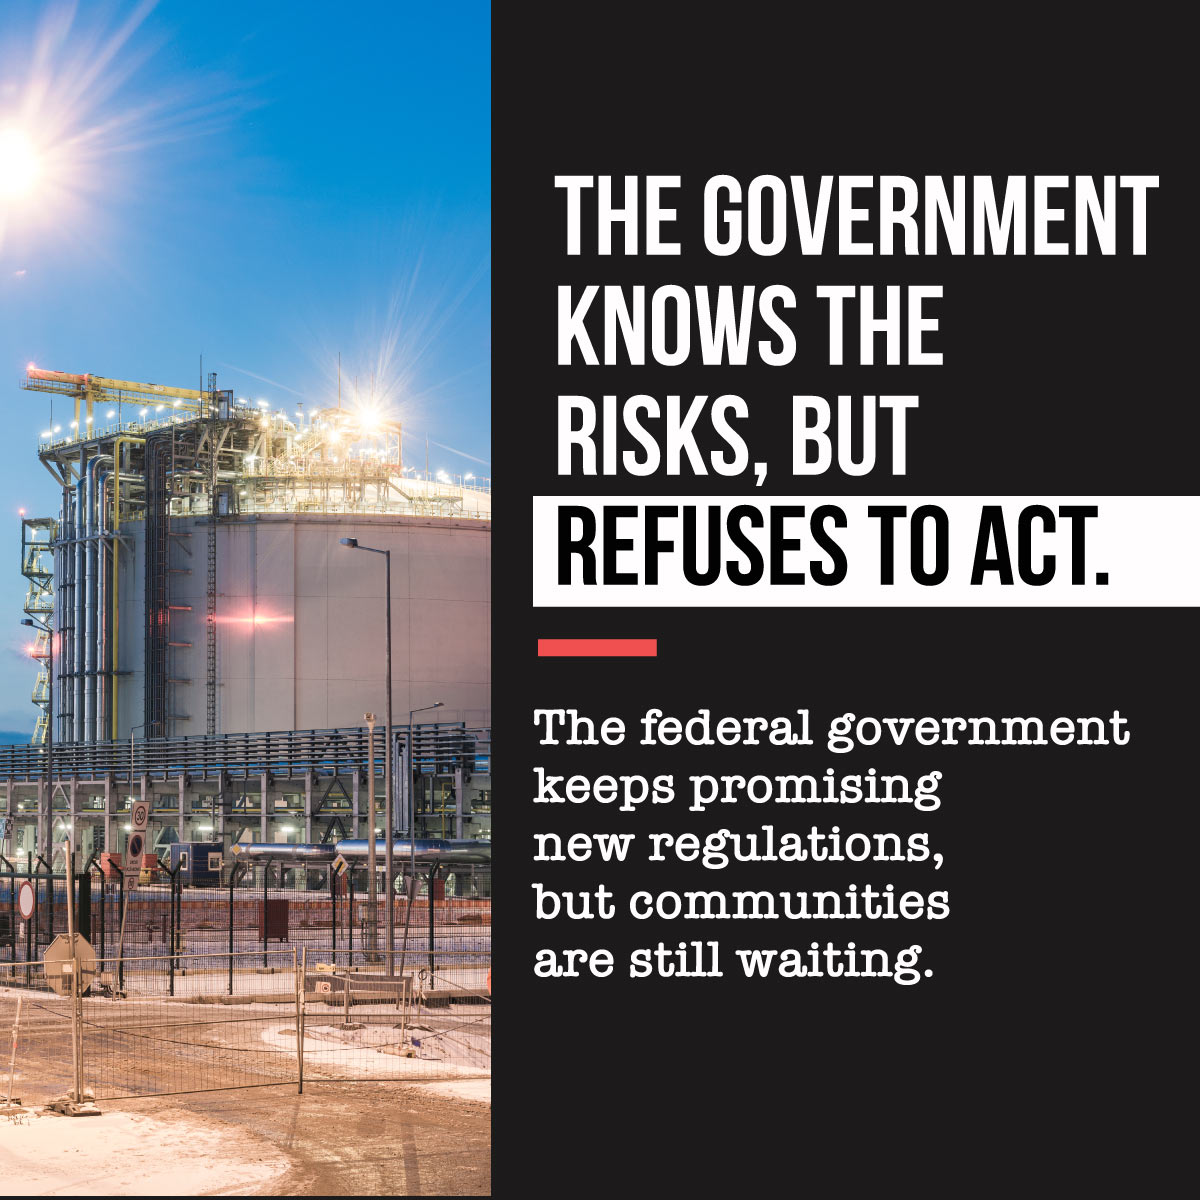 An image of an LNG facility on the left. On the right, white text is overlaid on a black background saying 